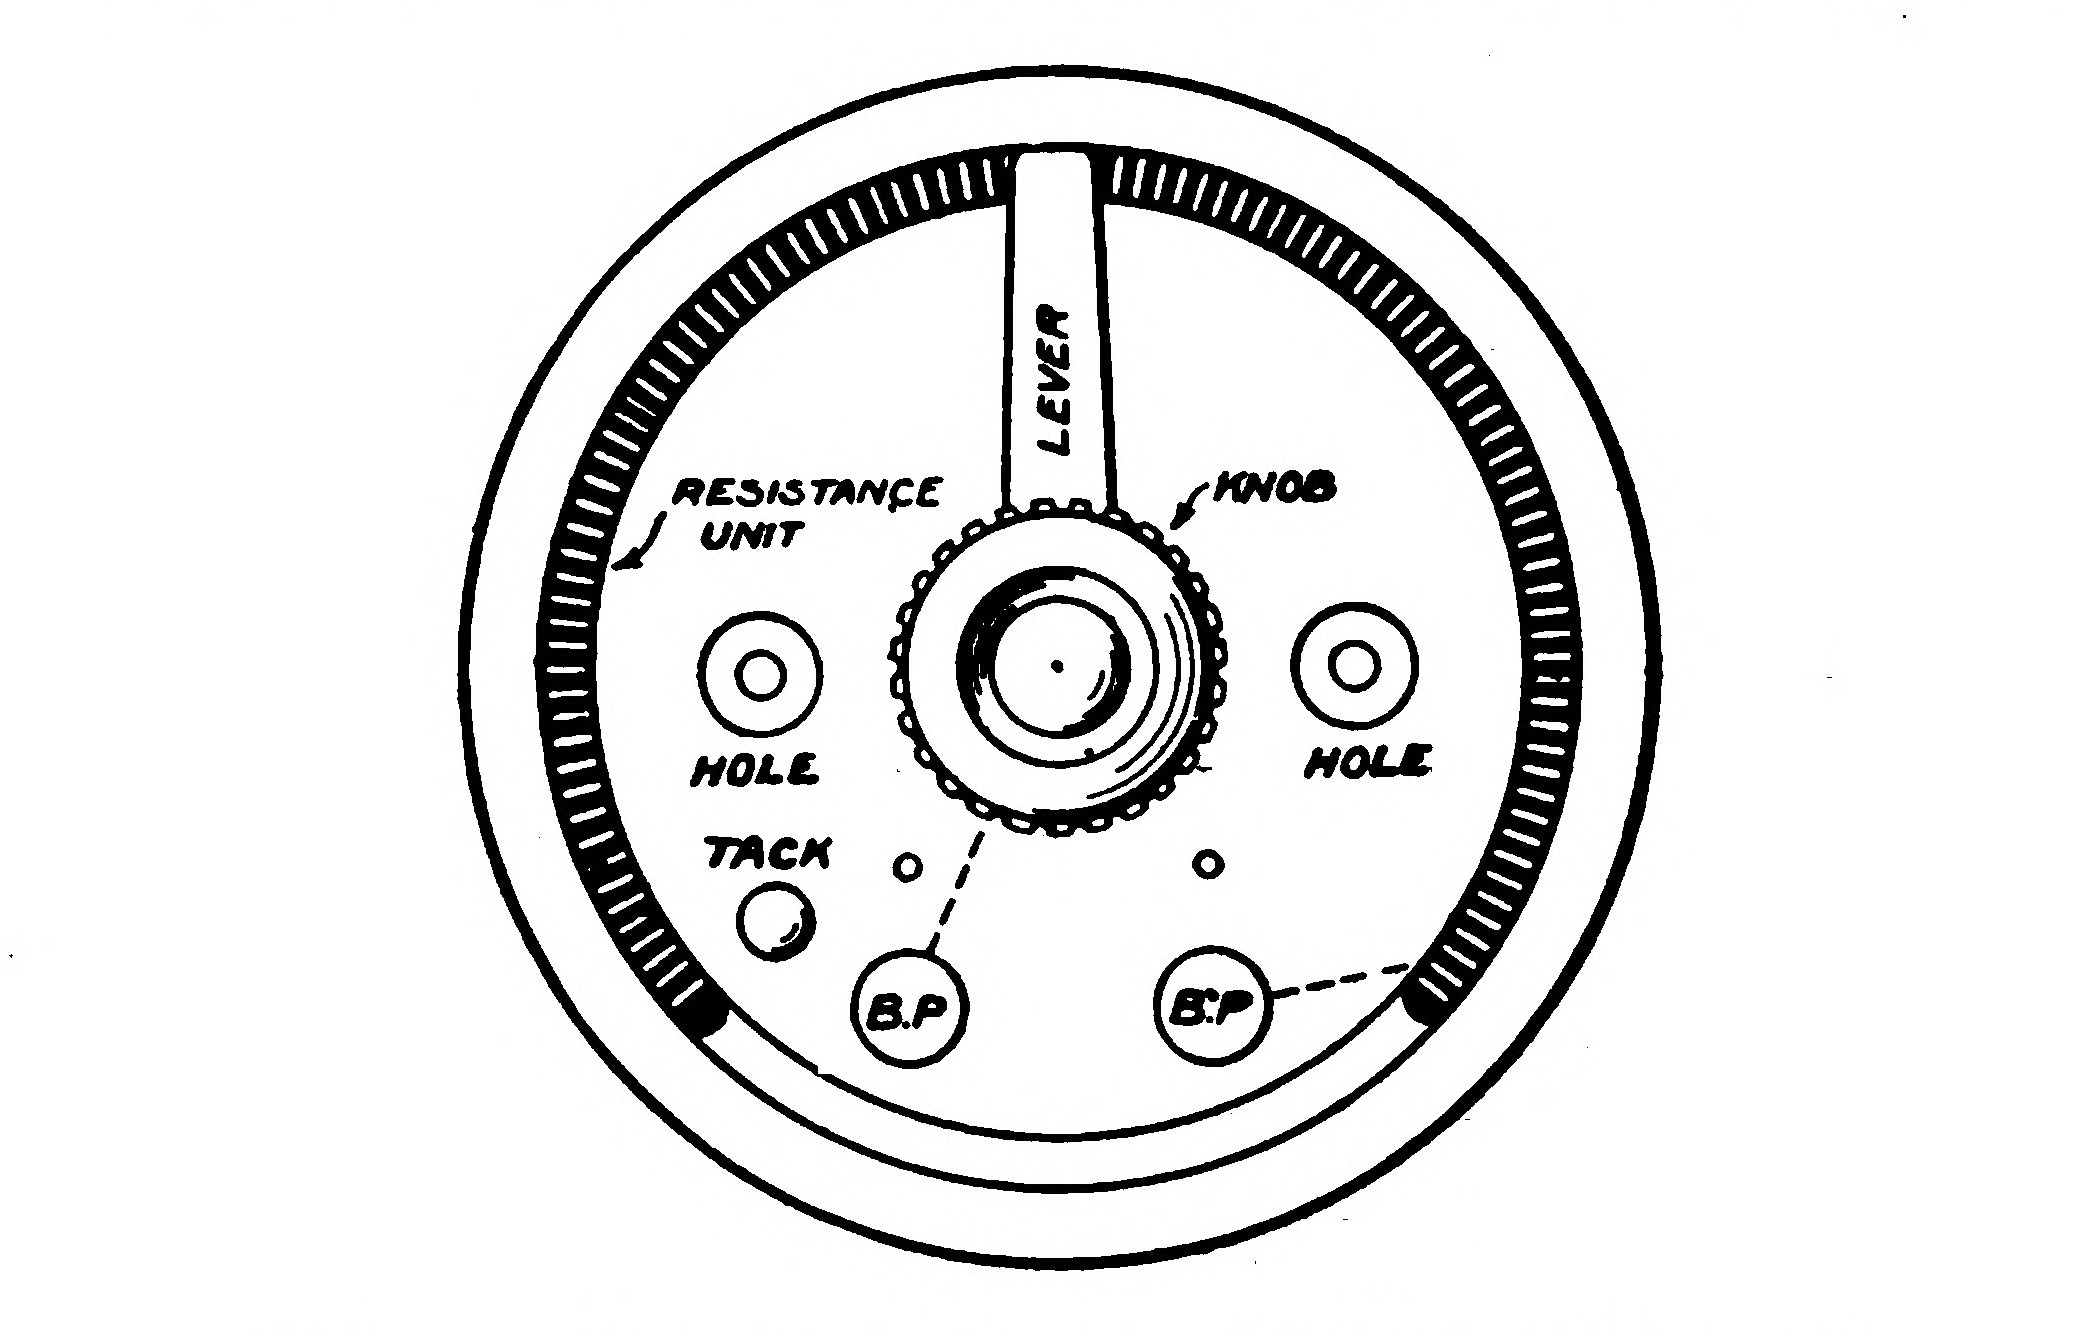 FIG. 77.—Top view of a small Battery Rheostat.